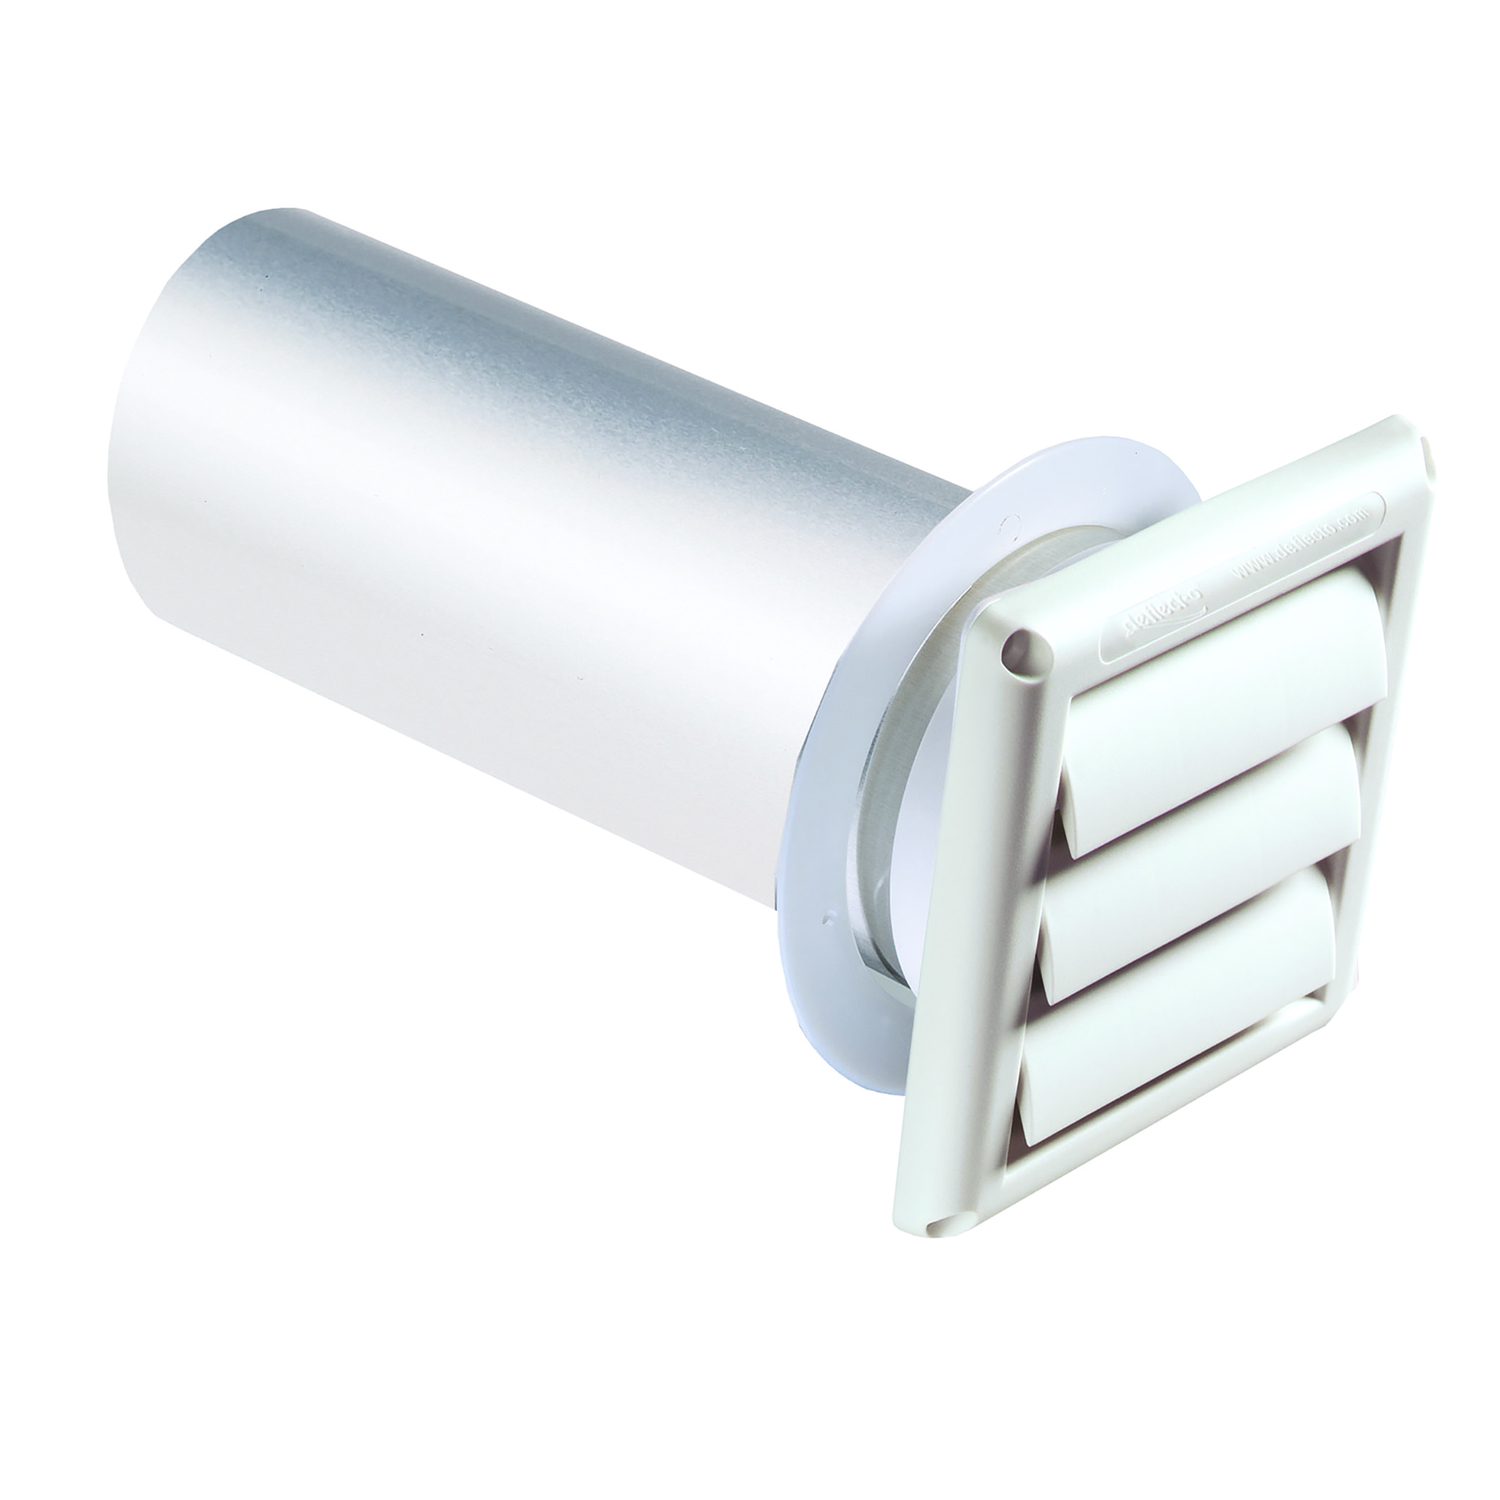 Ace 4 in. W X 6 in. L White Plastic Dryer Vent Hood